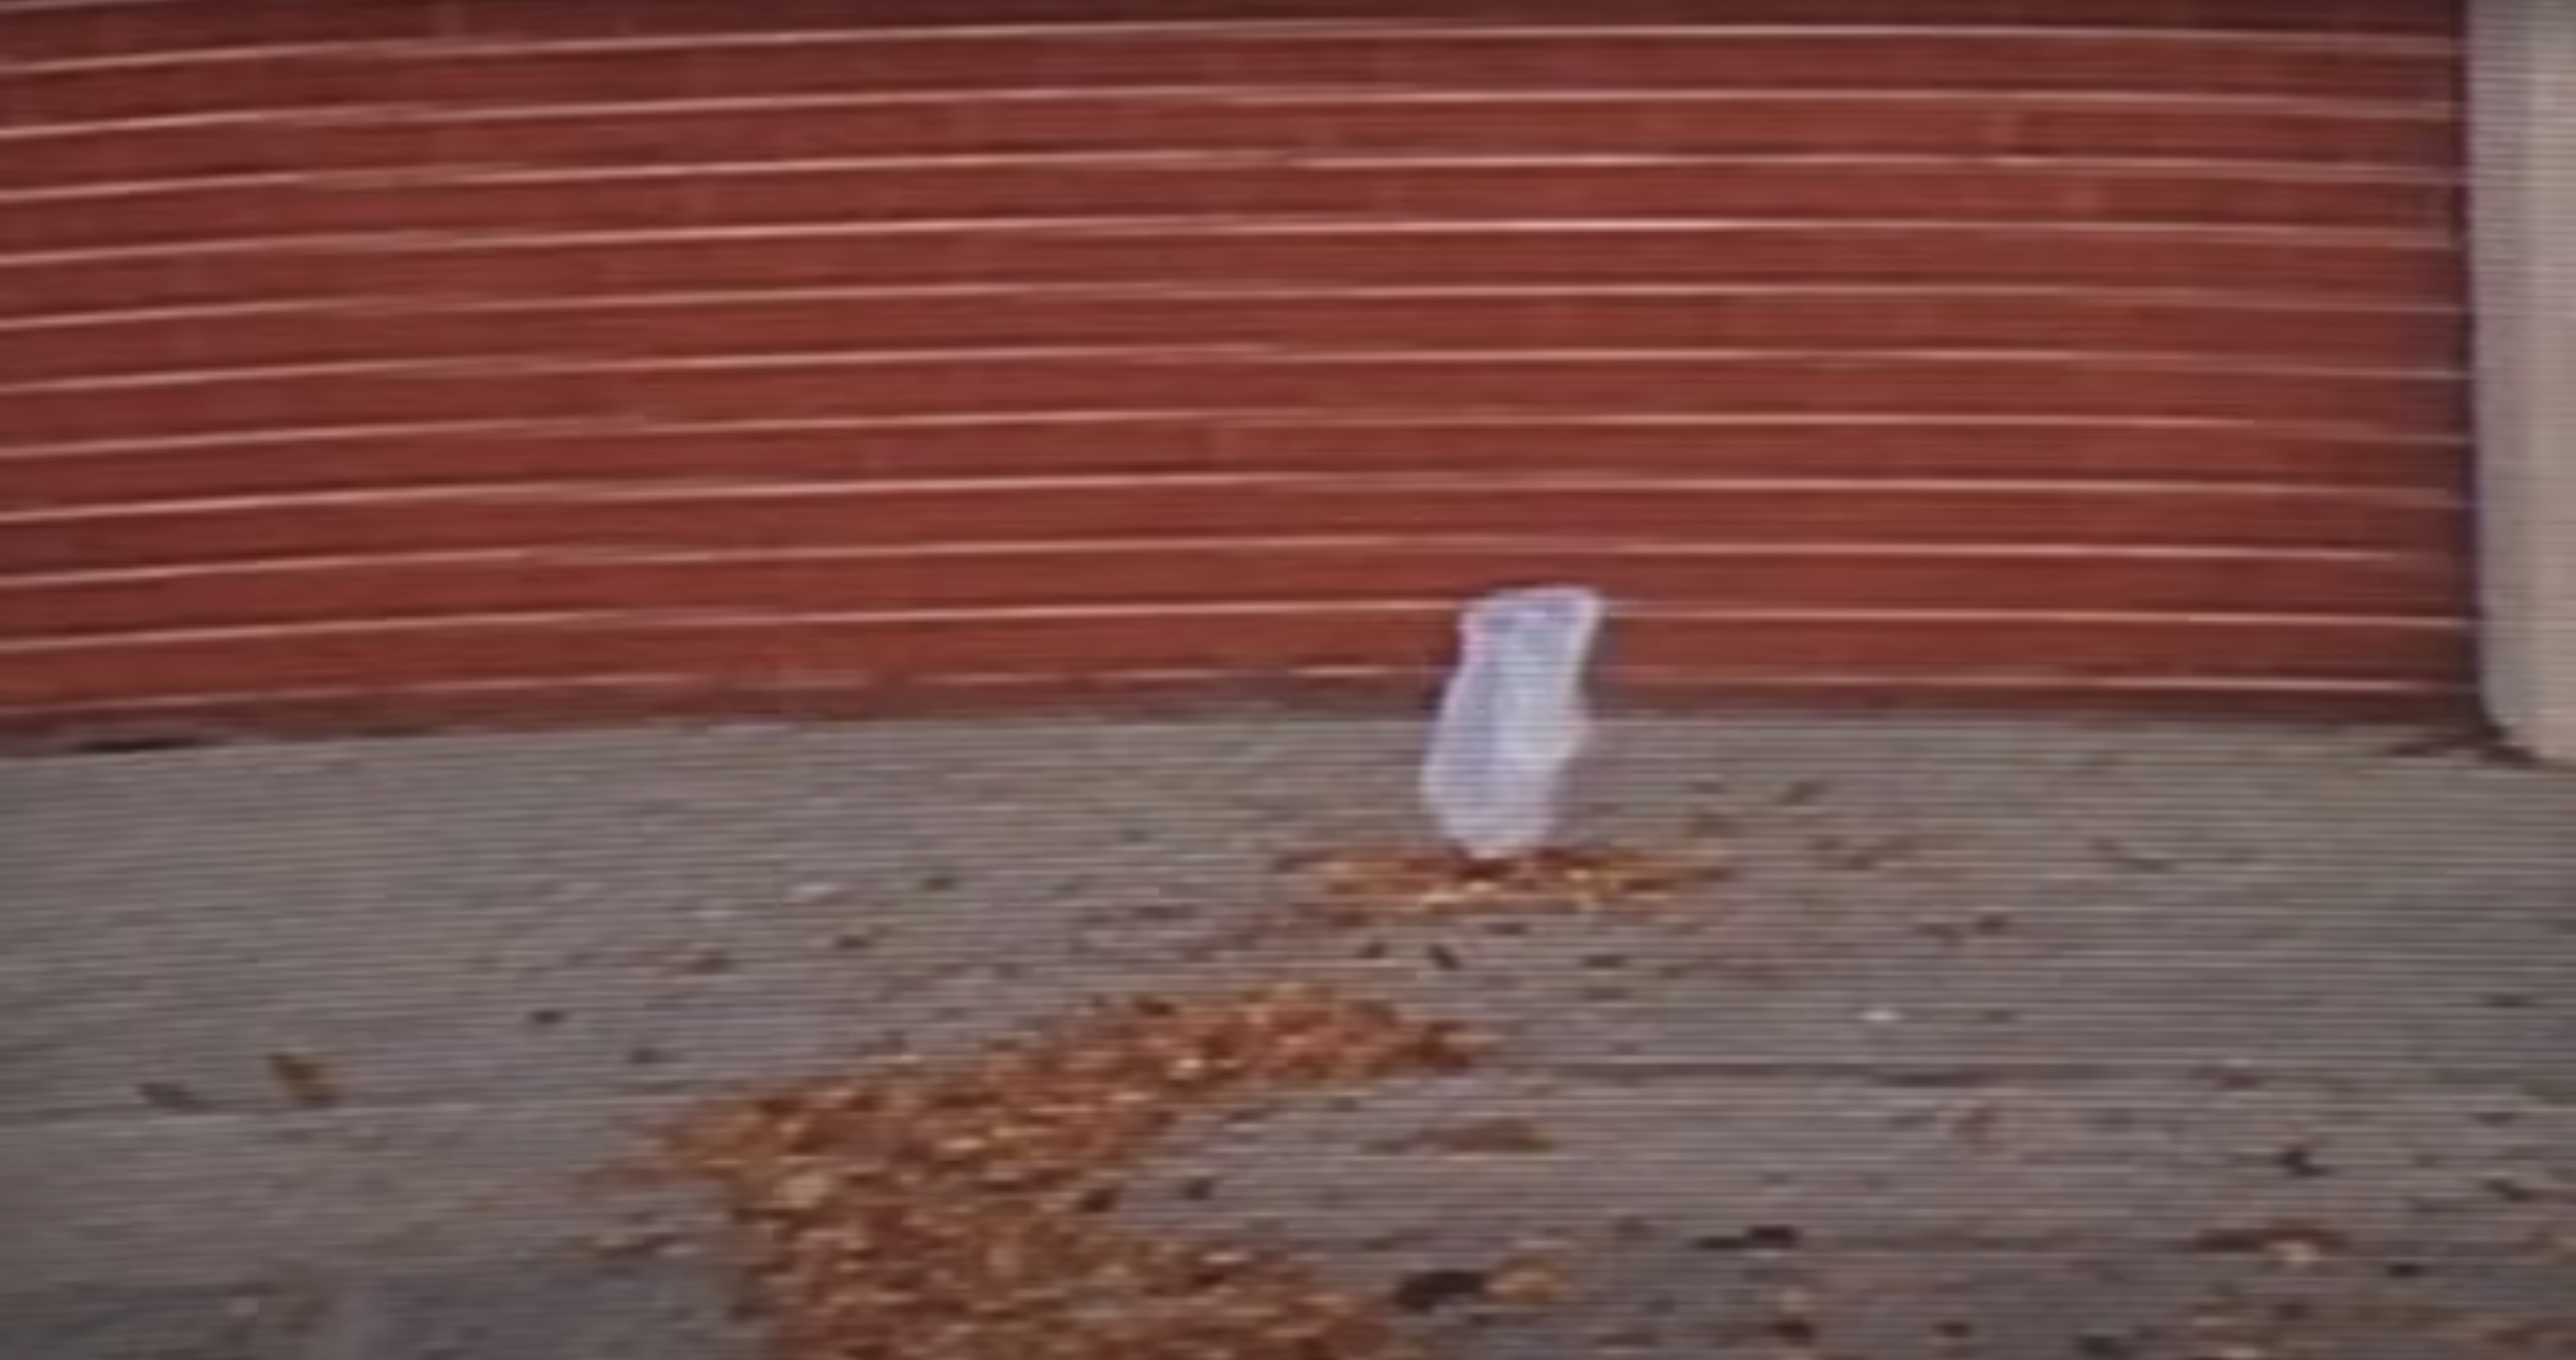 A Dancing plastic bag in a scene from the film American Beauty (Thomas Newman)